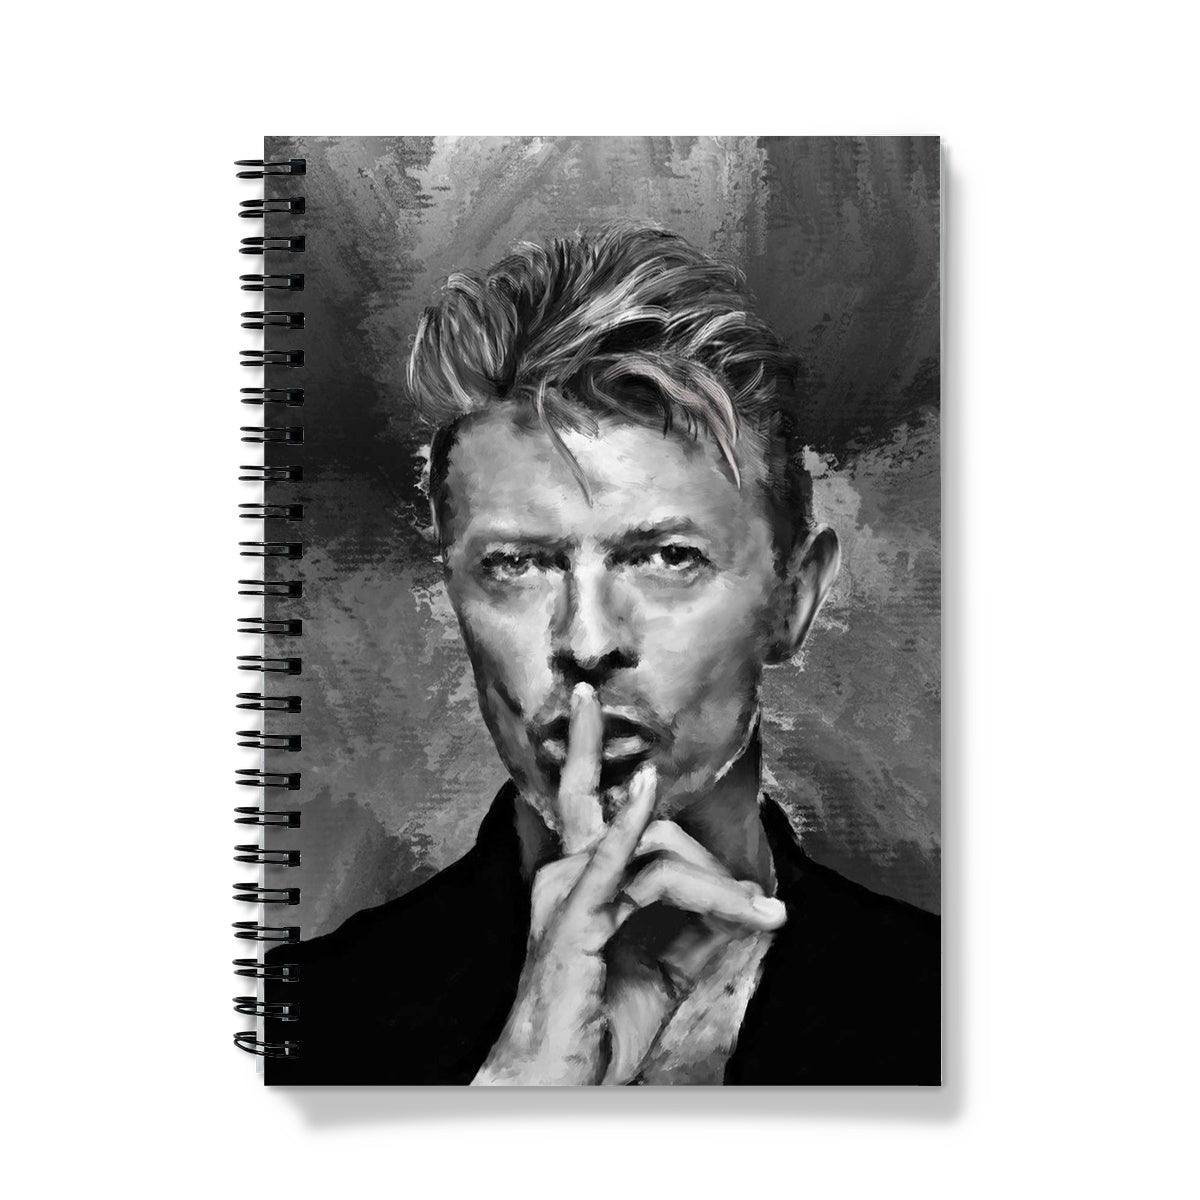 Bowie 'Shhh!' Painting Notebook